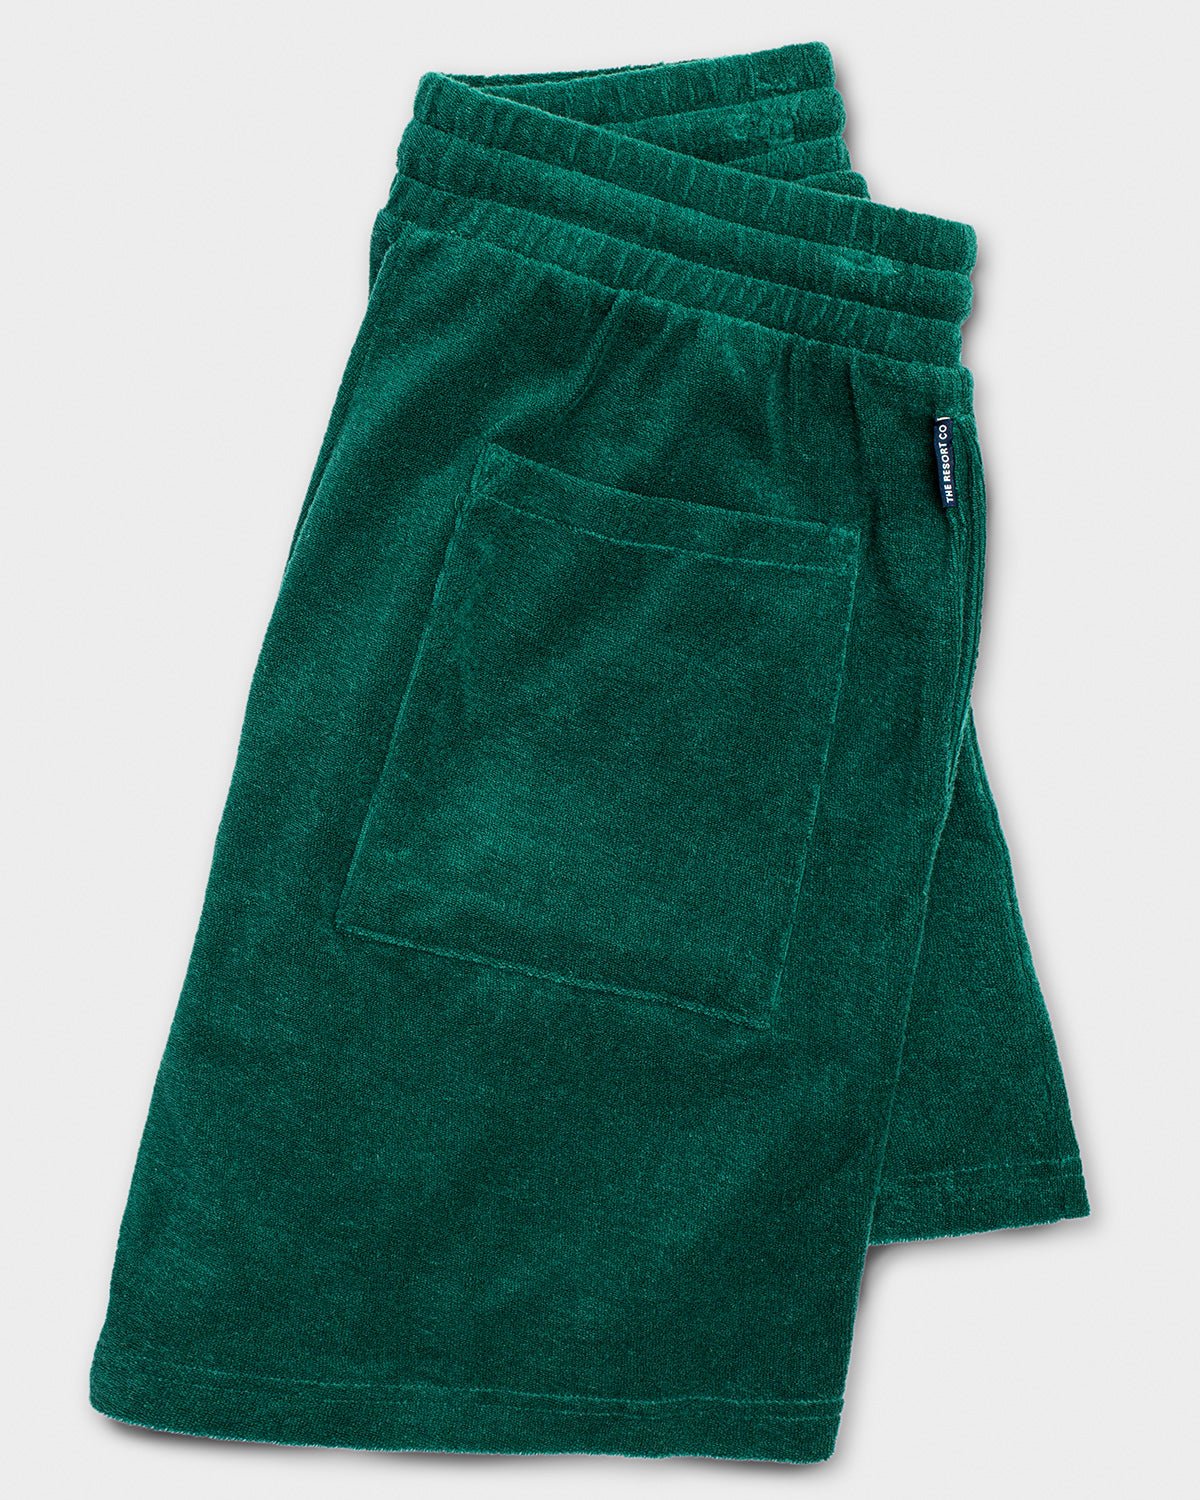 Terry Shorts Emerald Green - THE RESORT CO